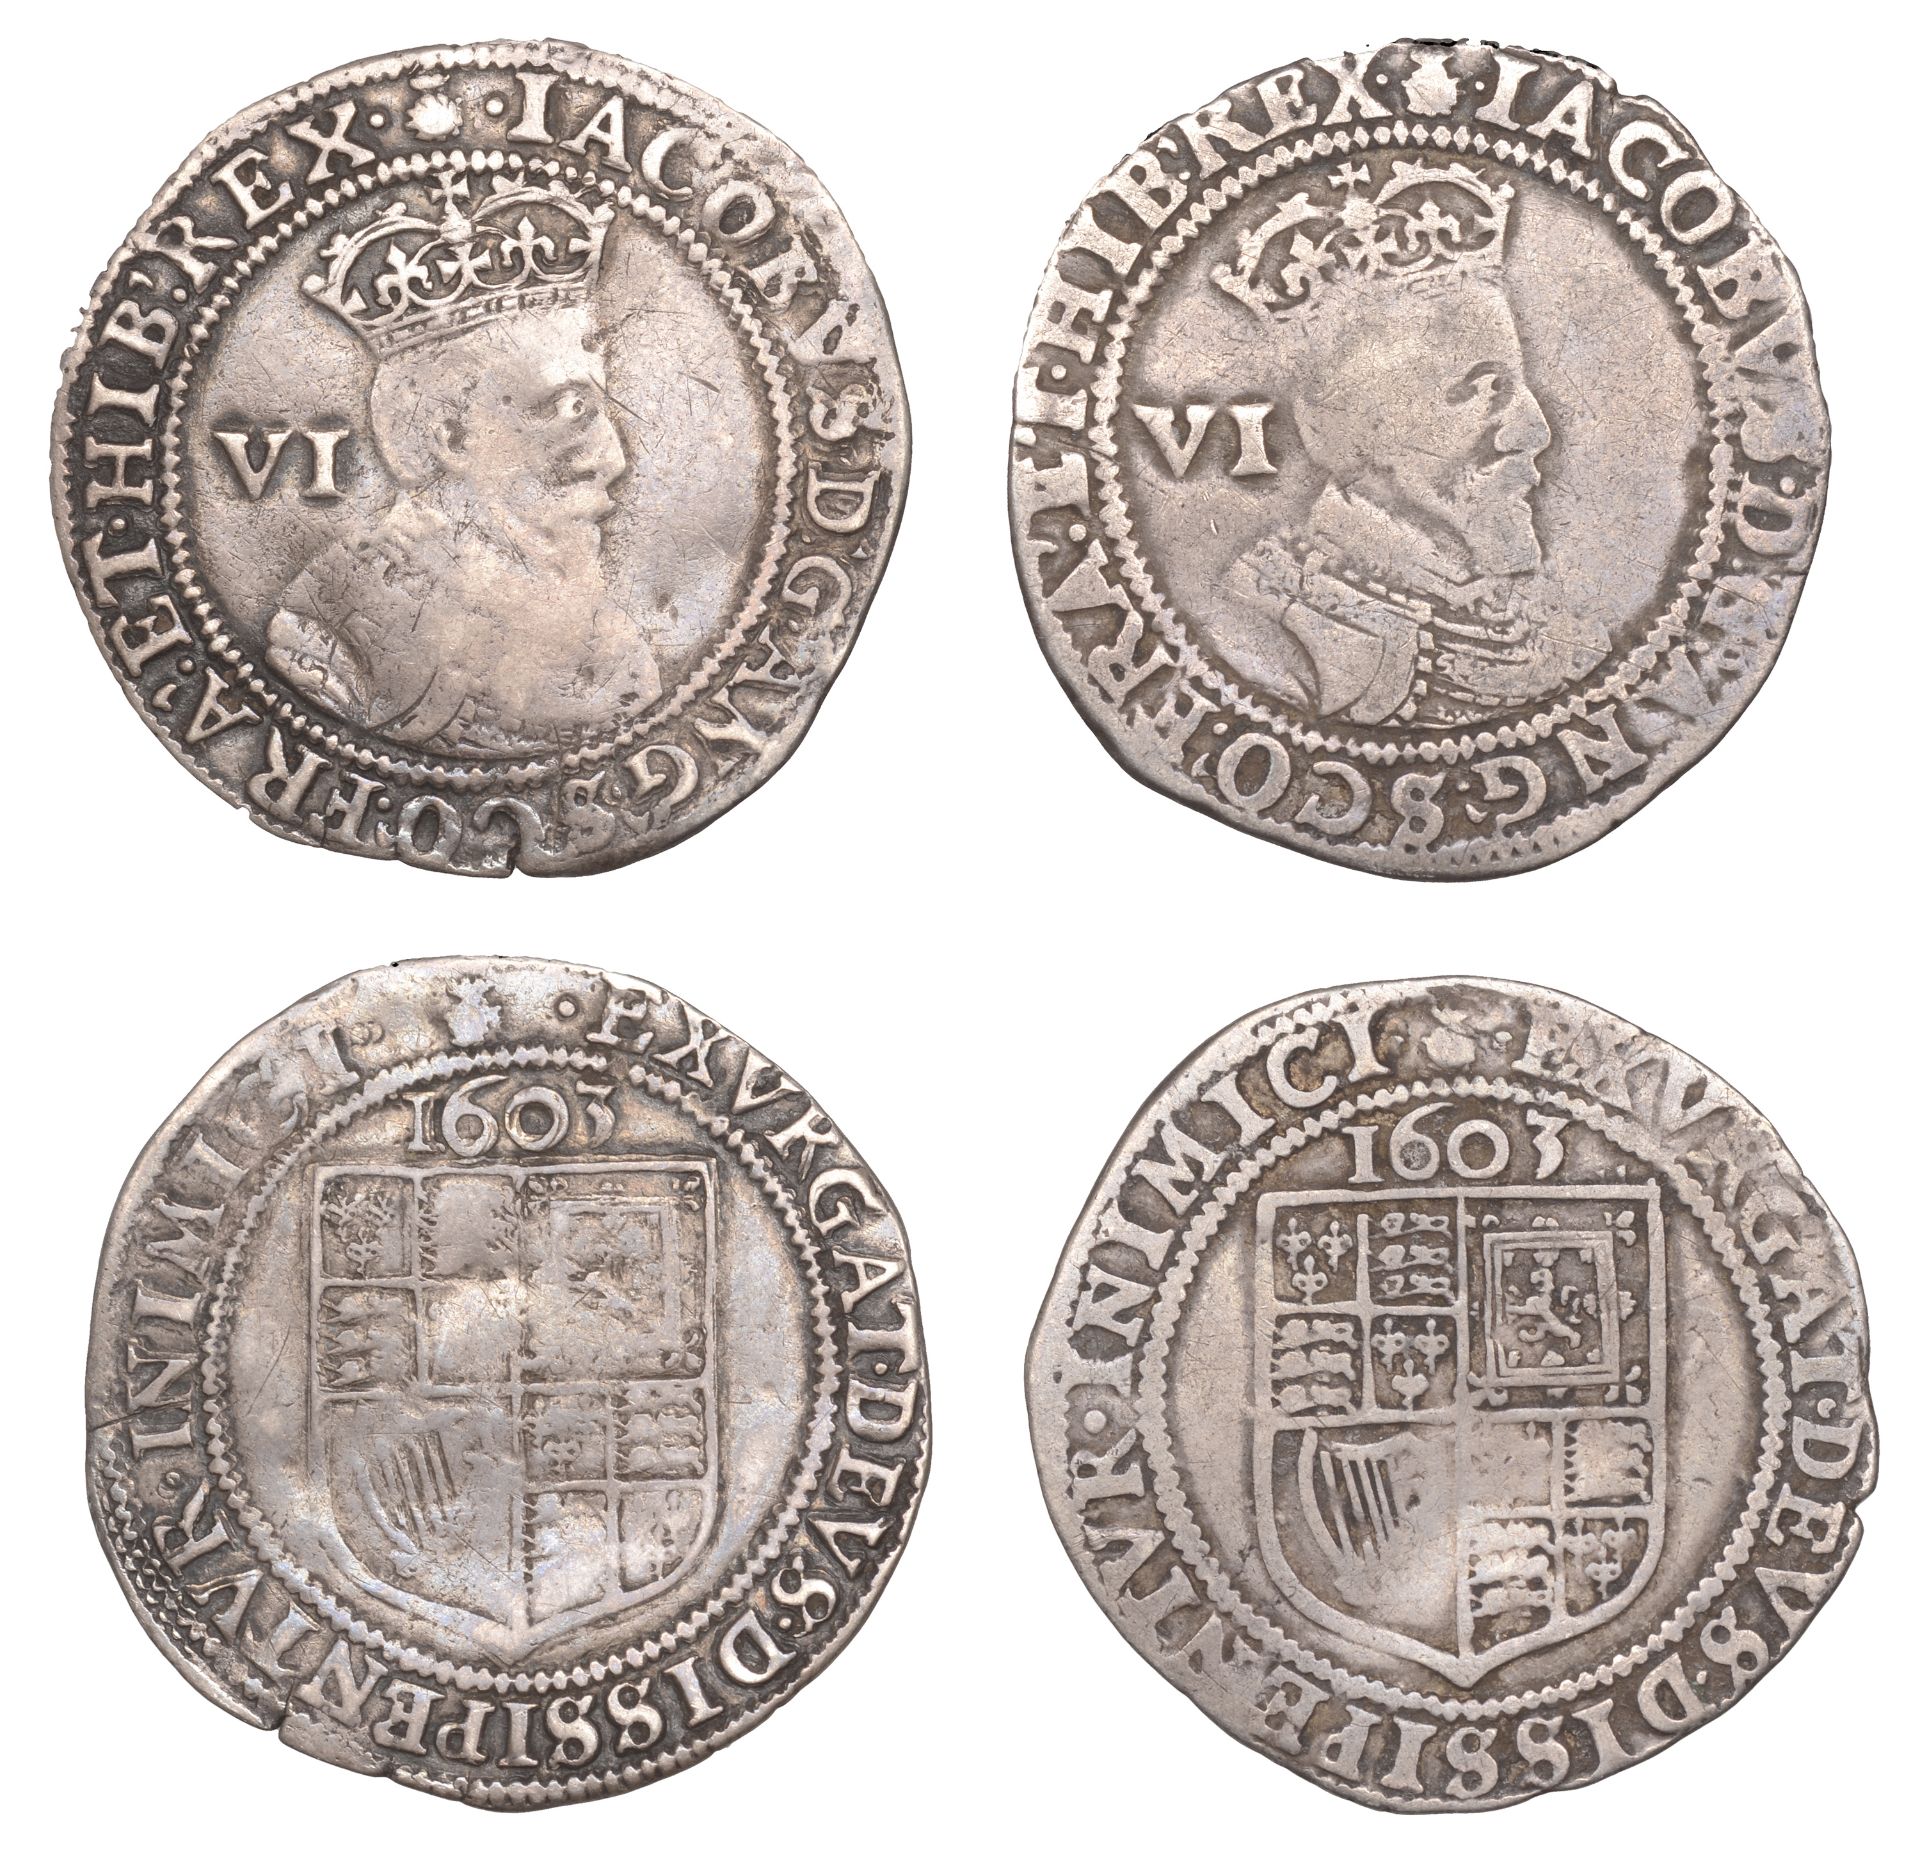 James I (1603-1625), First coinage, Sixpences (2), both 1603, mm. thistle, first and second...